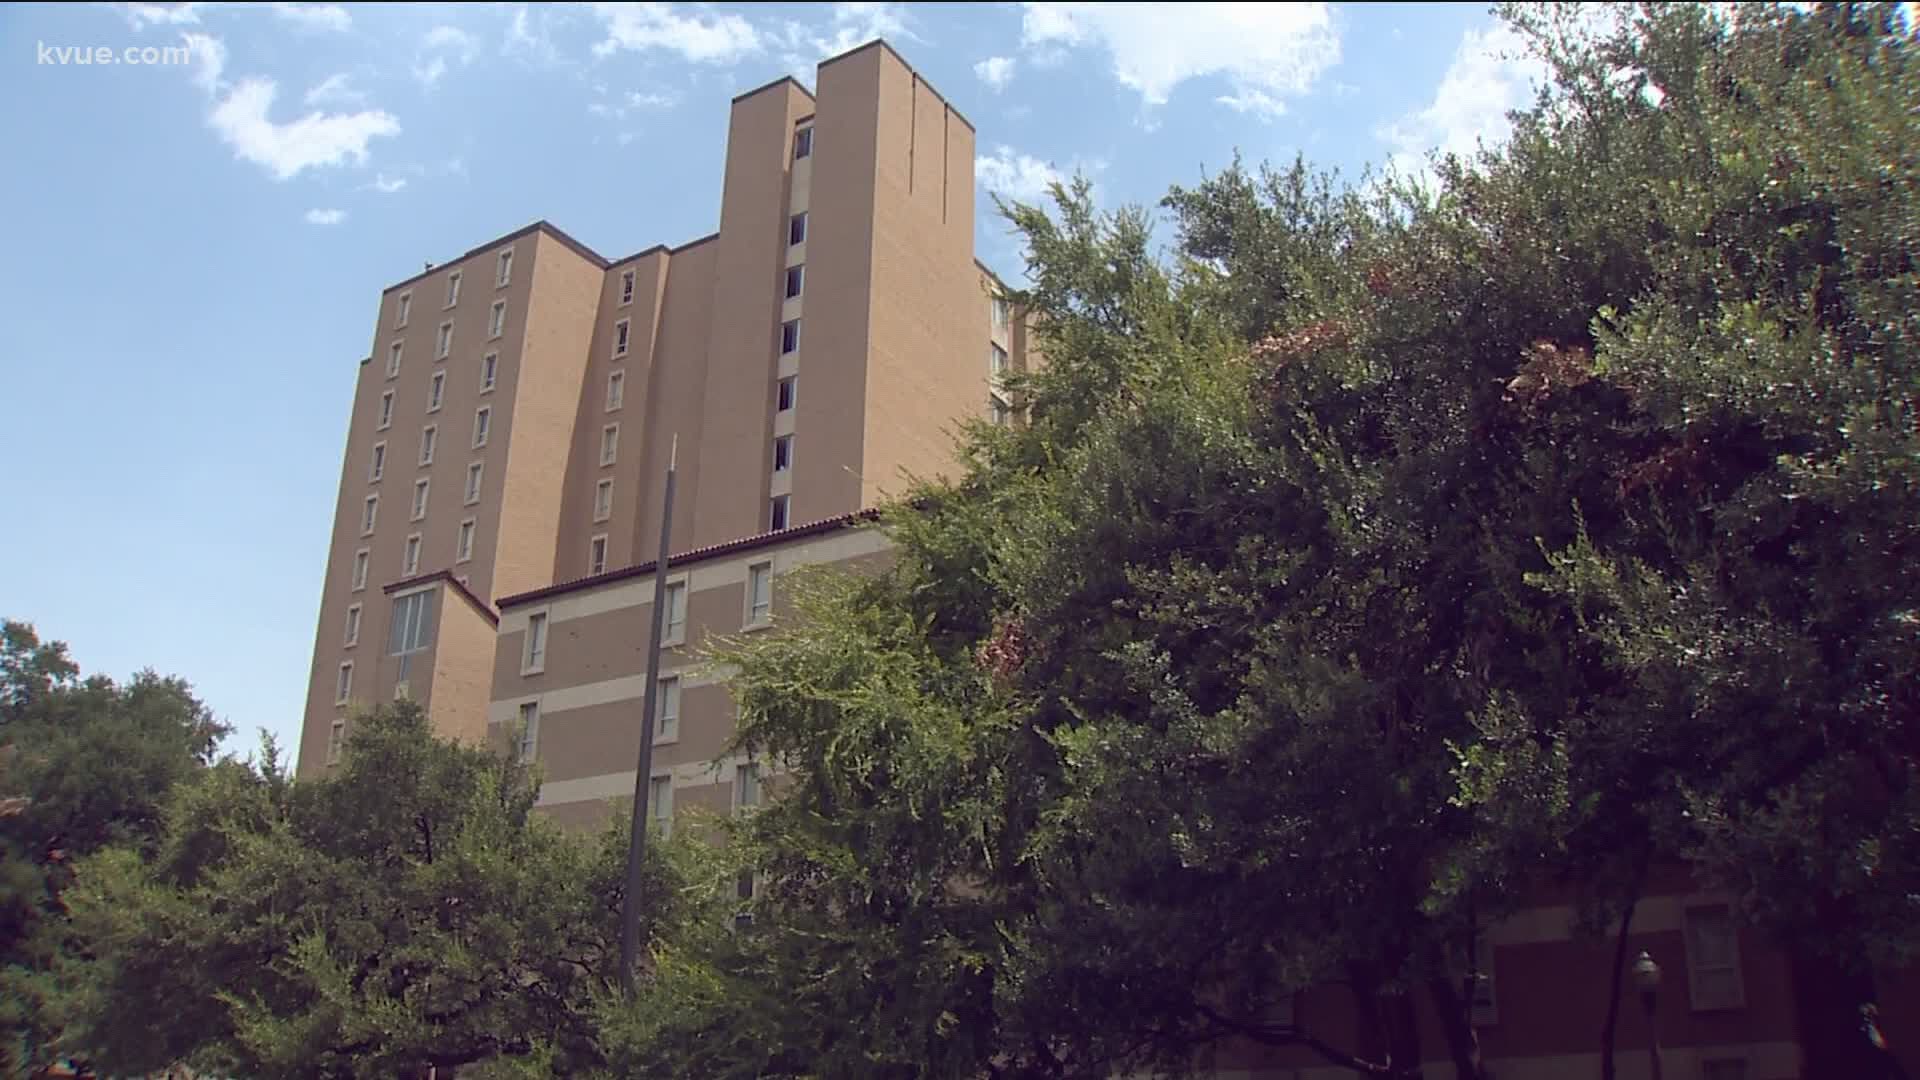 Five UT students have tested positive for COVID-19 since classes began last week. At least three of the live in dorms.